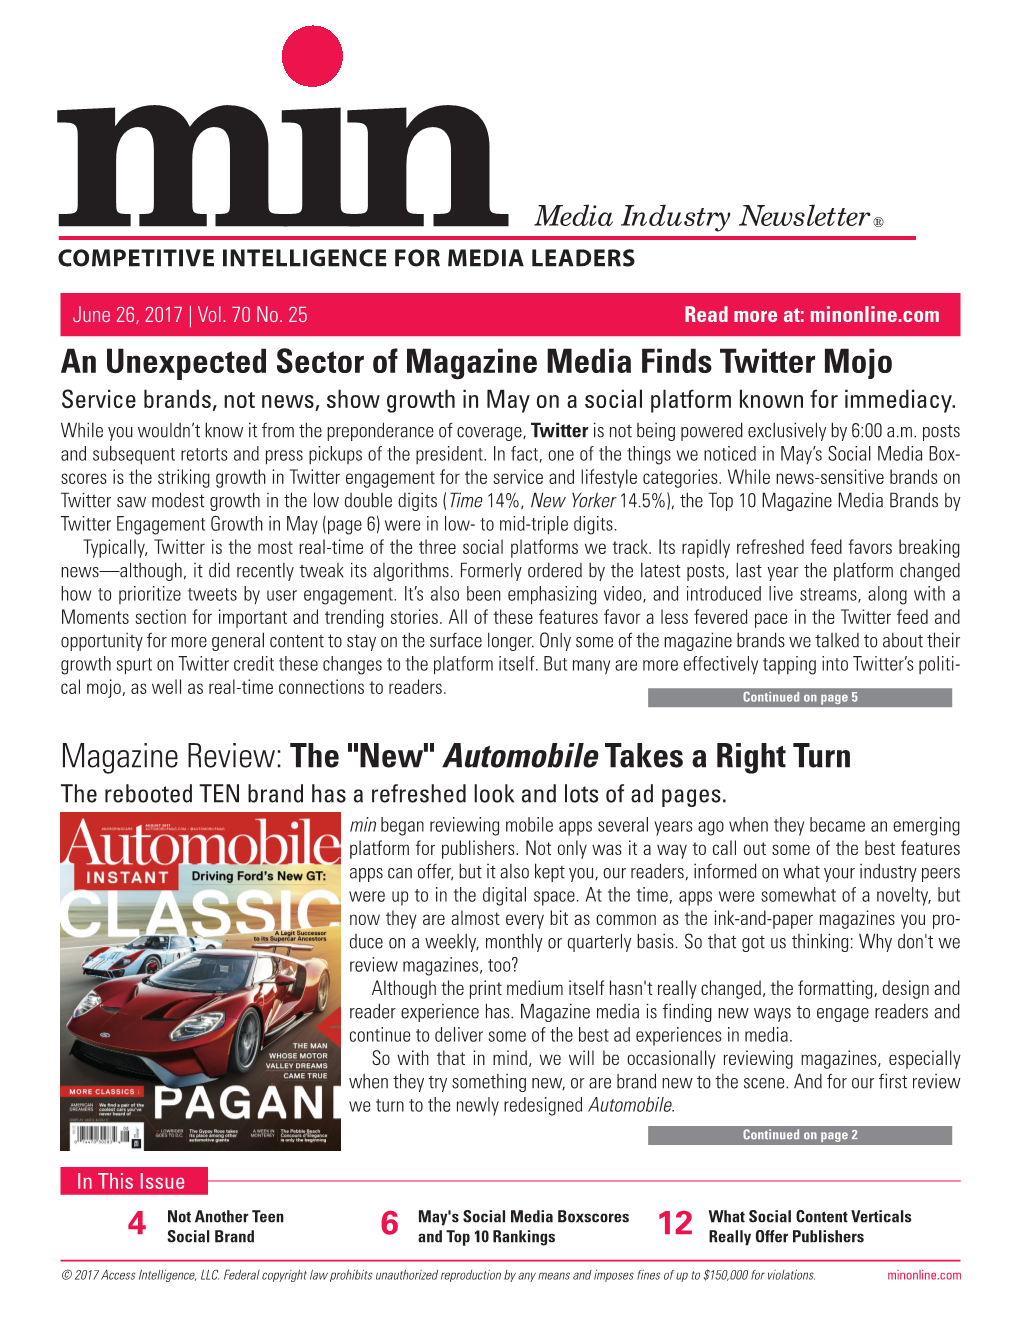 Automobile Takes a Right Turn the Rebooted TEN Brand Has a Refreshed Look and Lots of Ad Pages